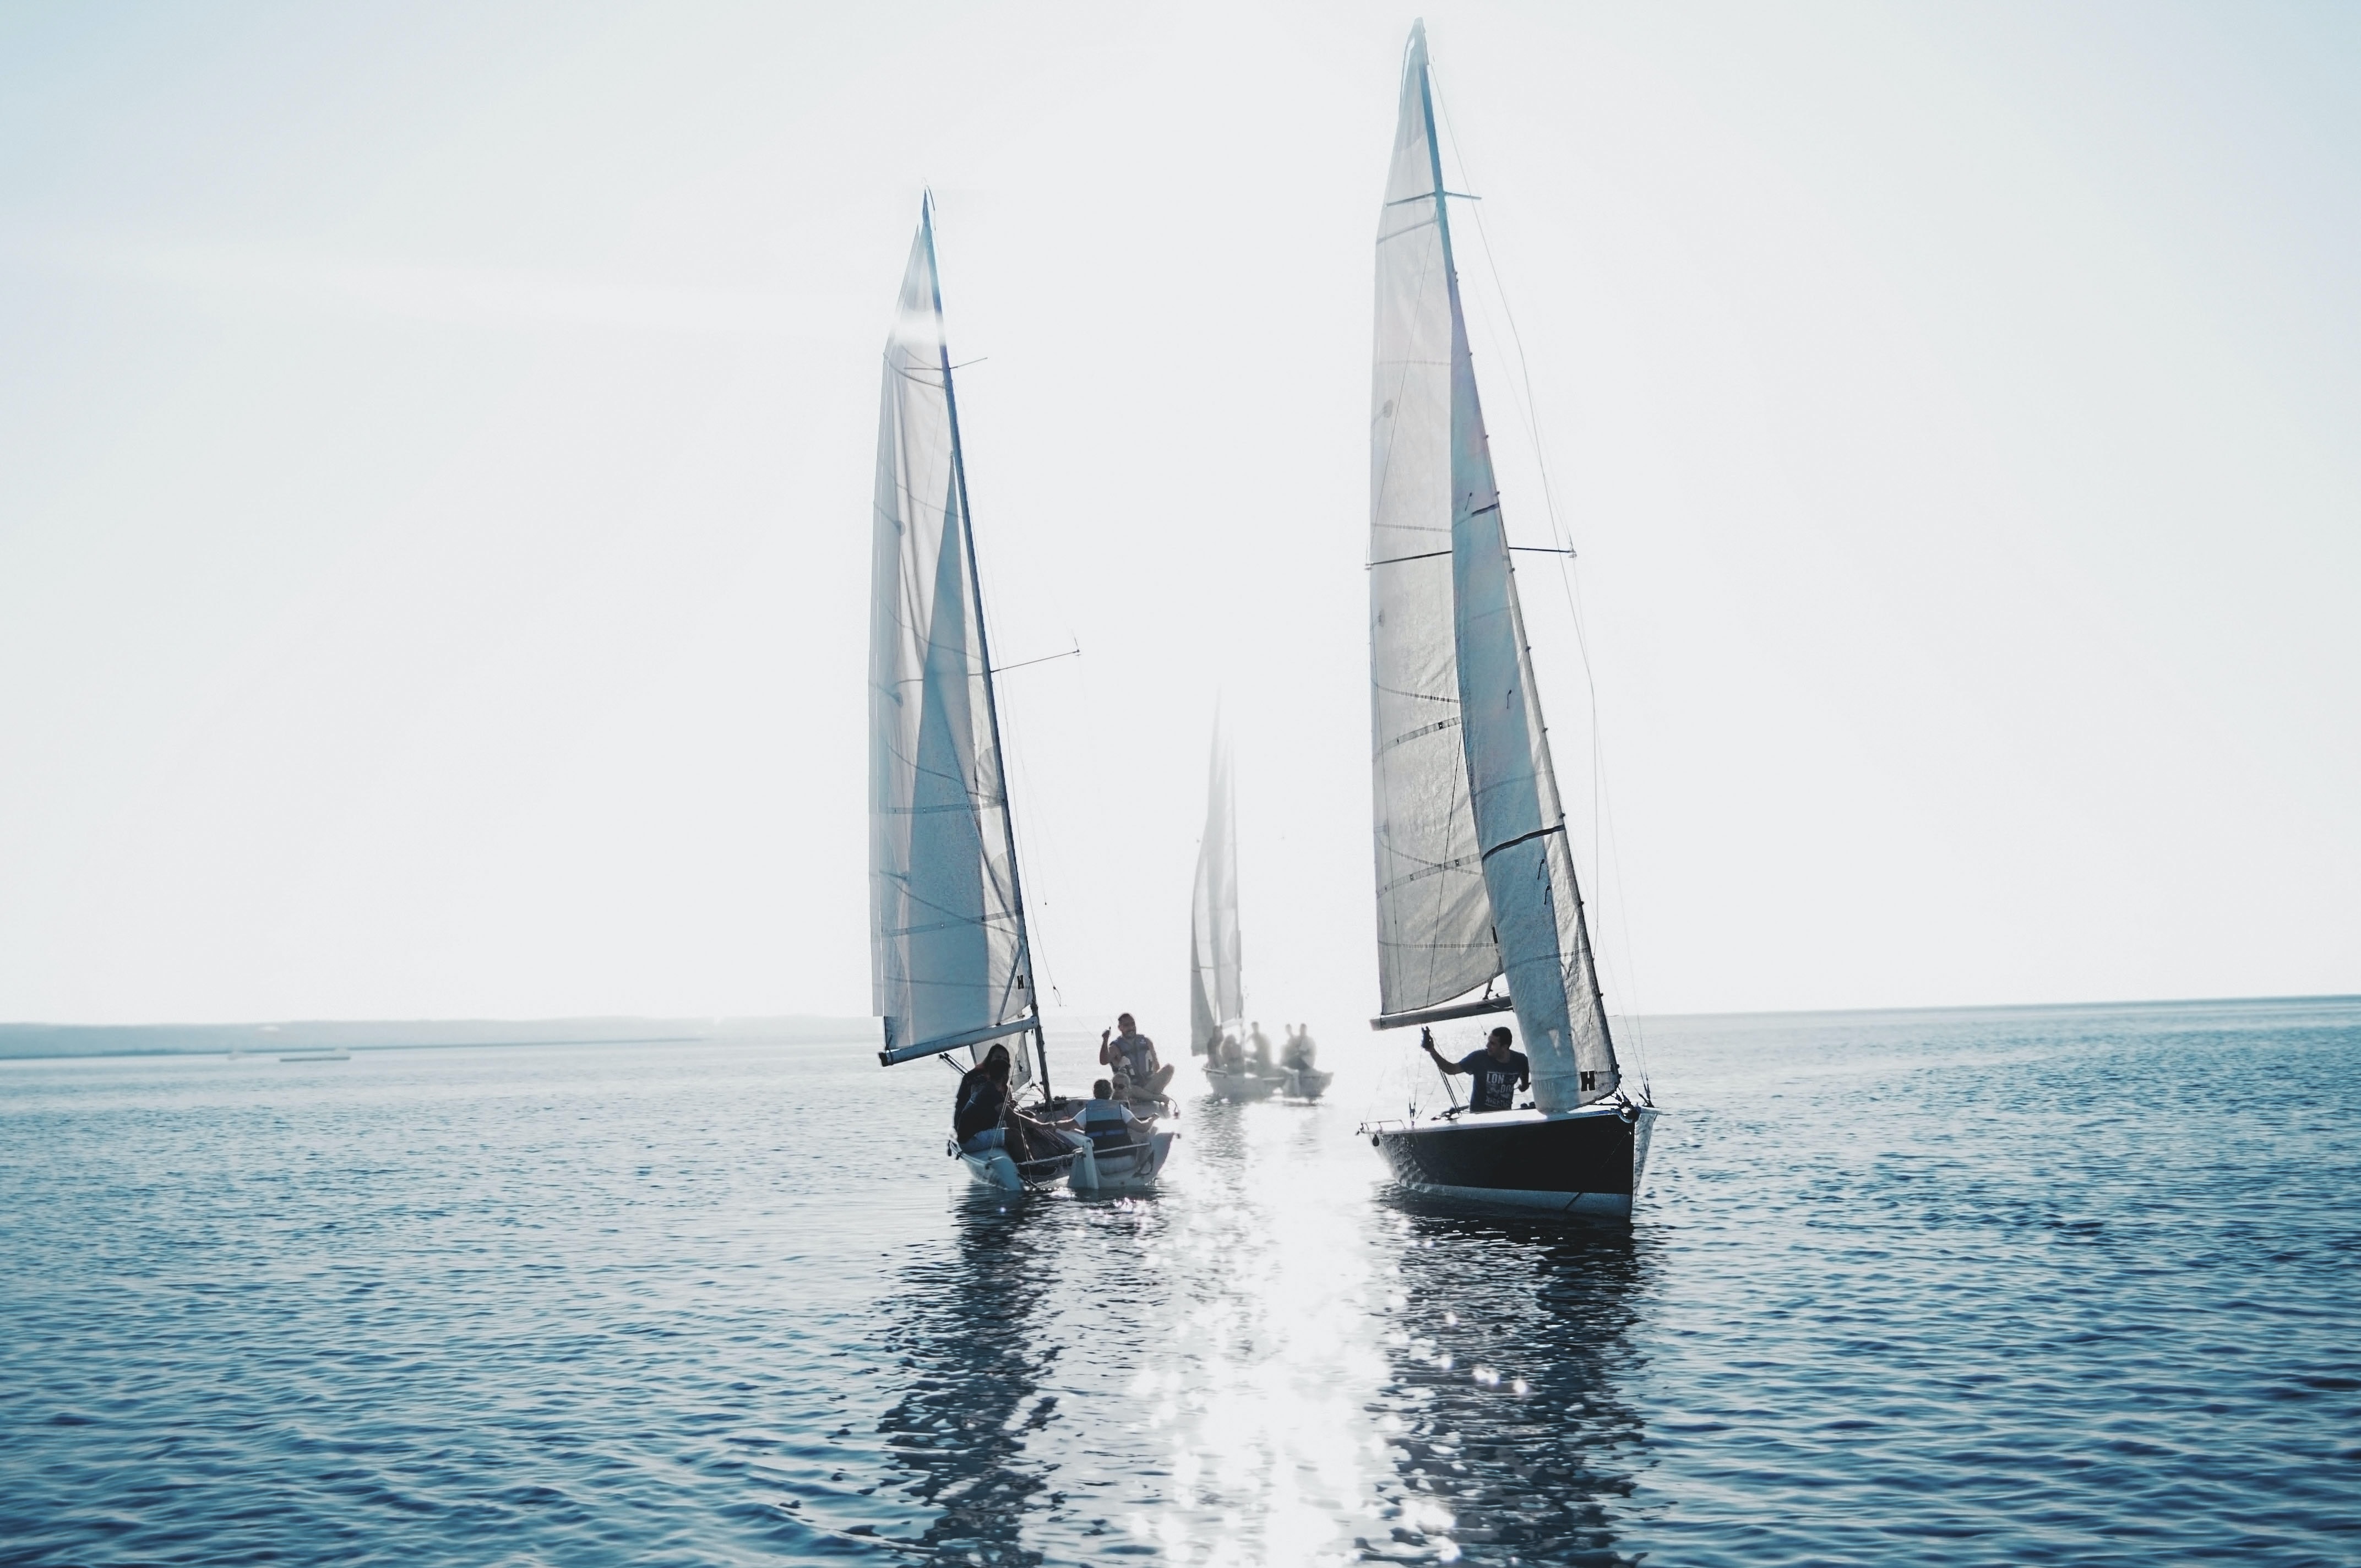 Three sailboats on the water with people